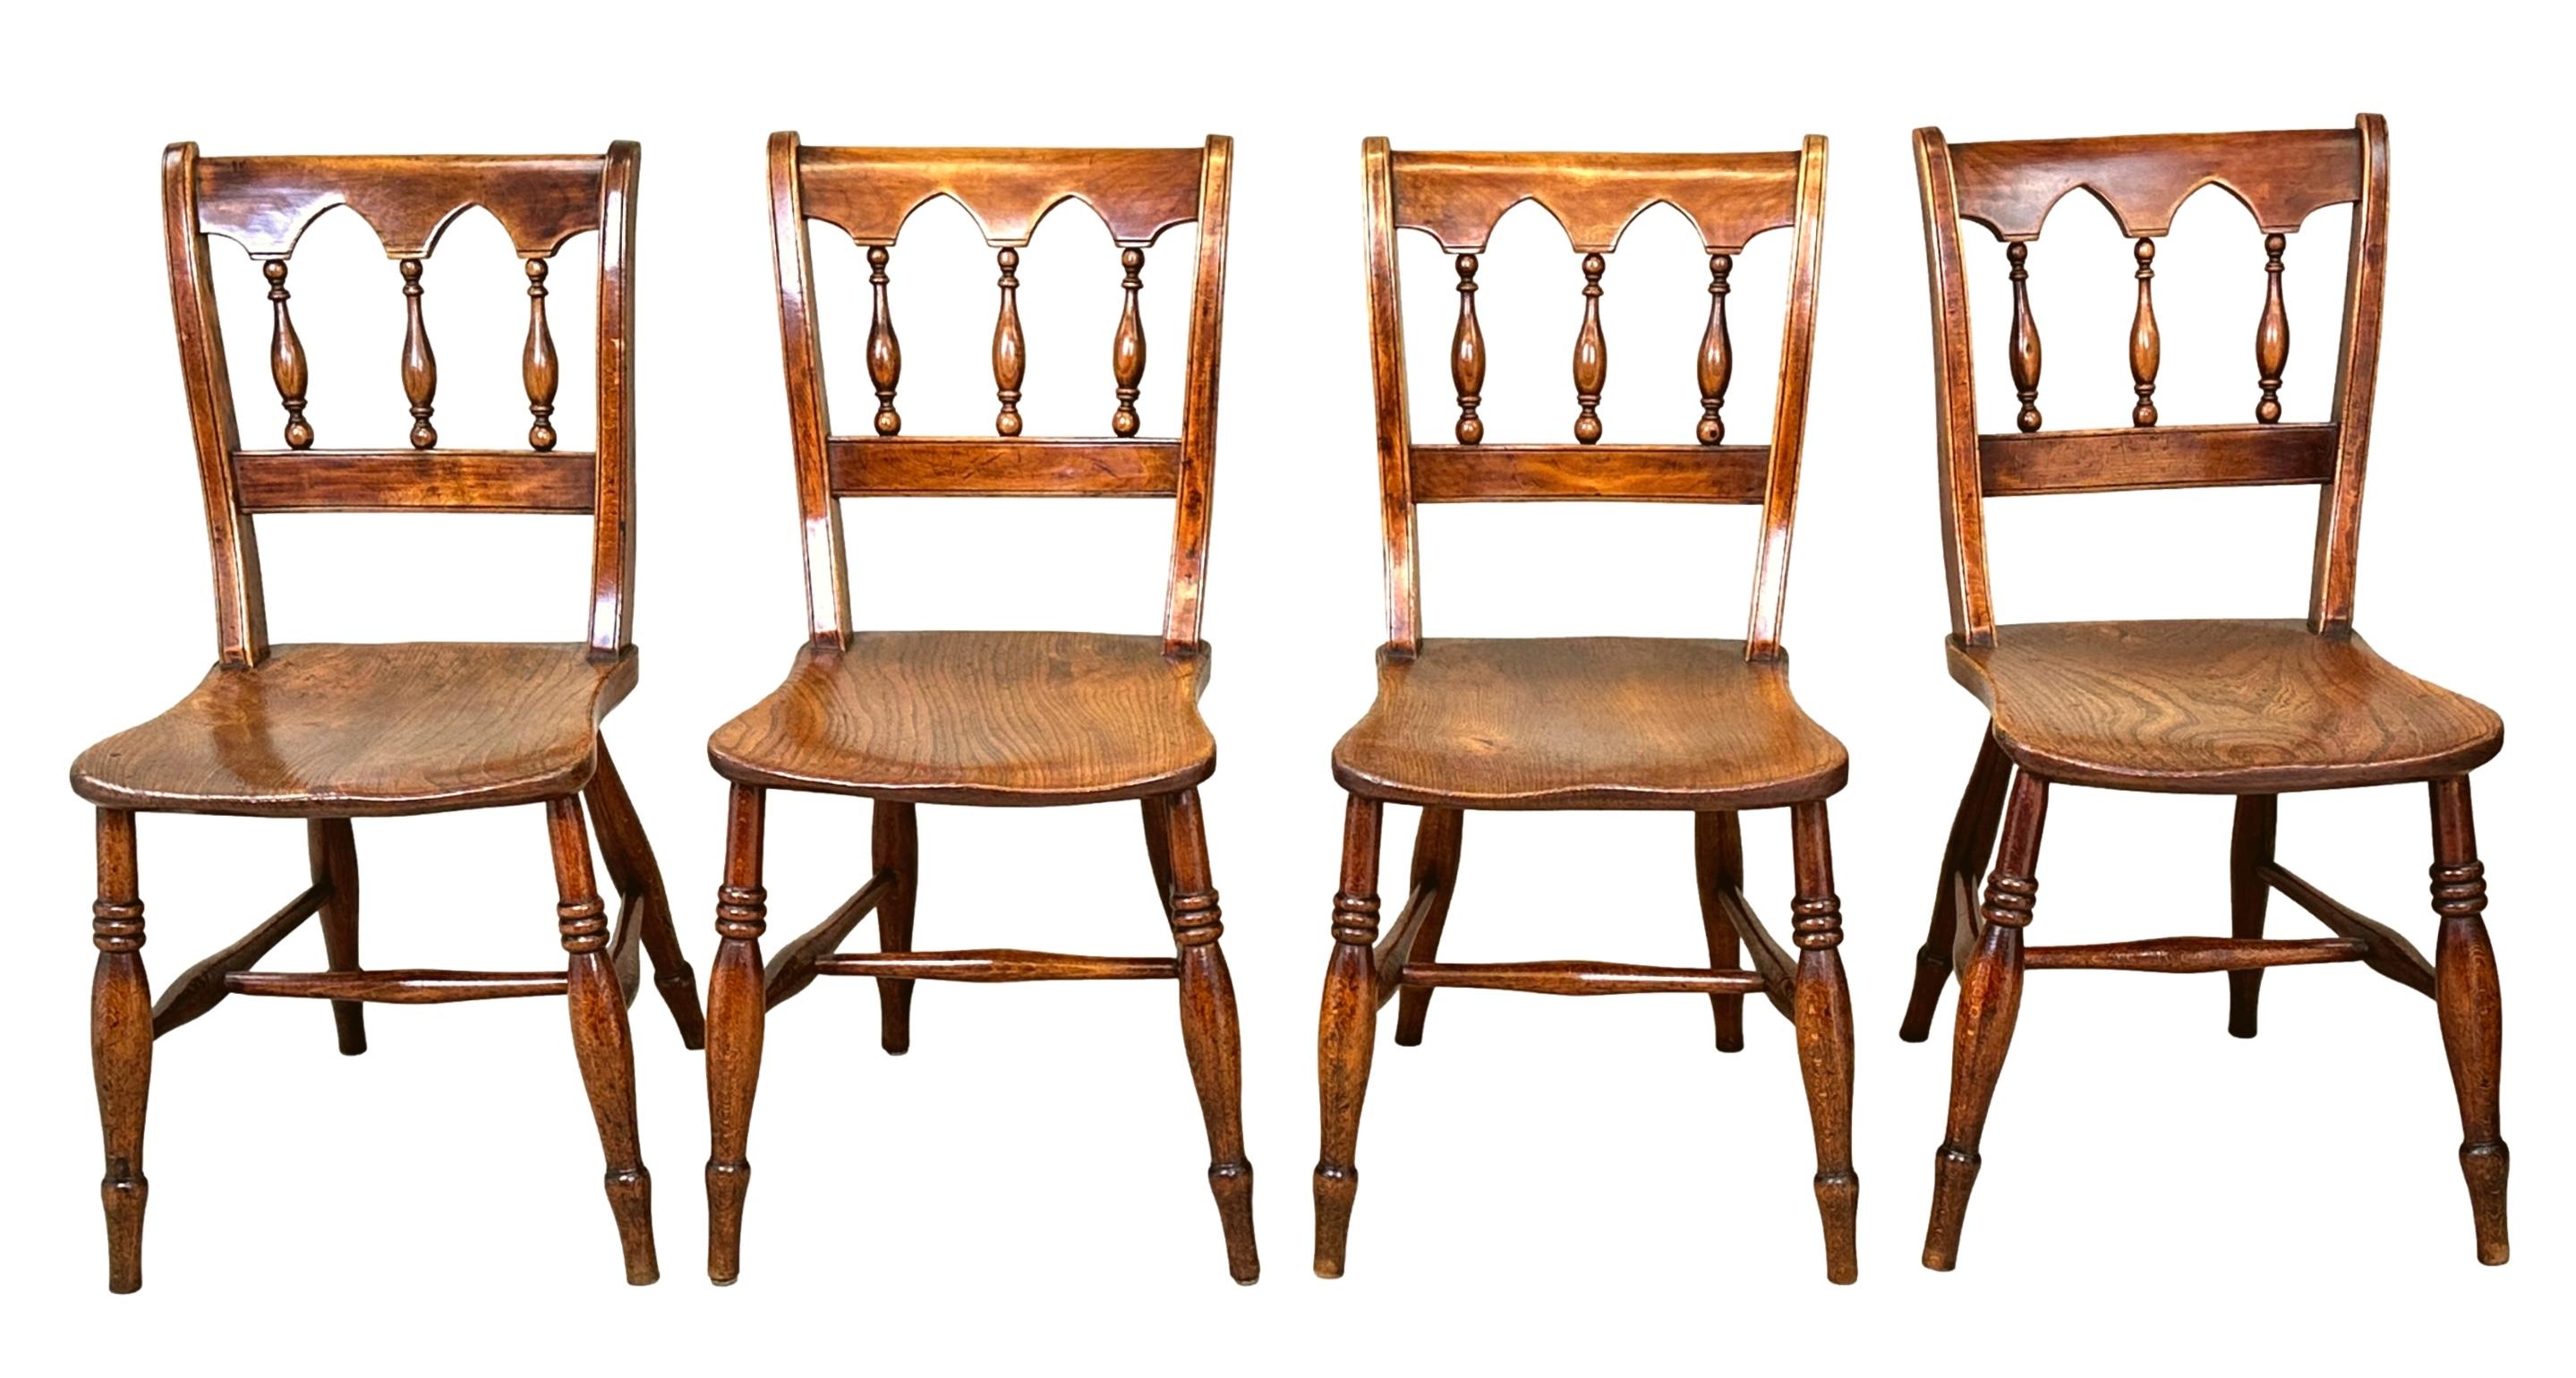 An Extremely Attractive, Matched Set Of Eight, Mid 19th Century Elm And Beech Farmhouse Kitchen Windsor Dining Chairs, Having Elegant Arched Rails With Spindle Turned Upright Supports To Backs, Over Shaped Seats Raised On Turned Legs And